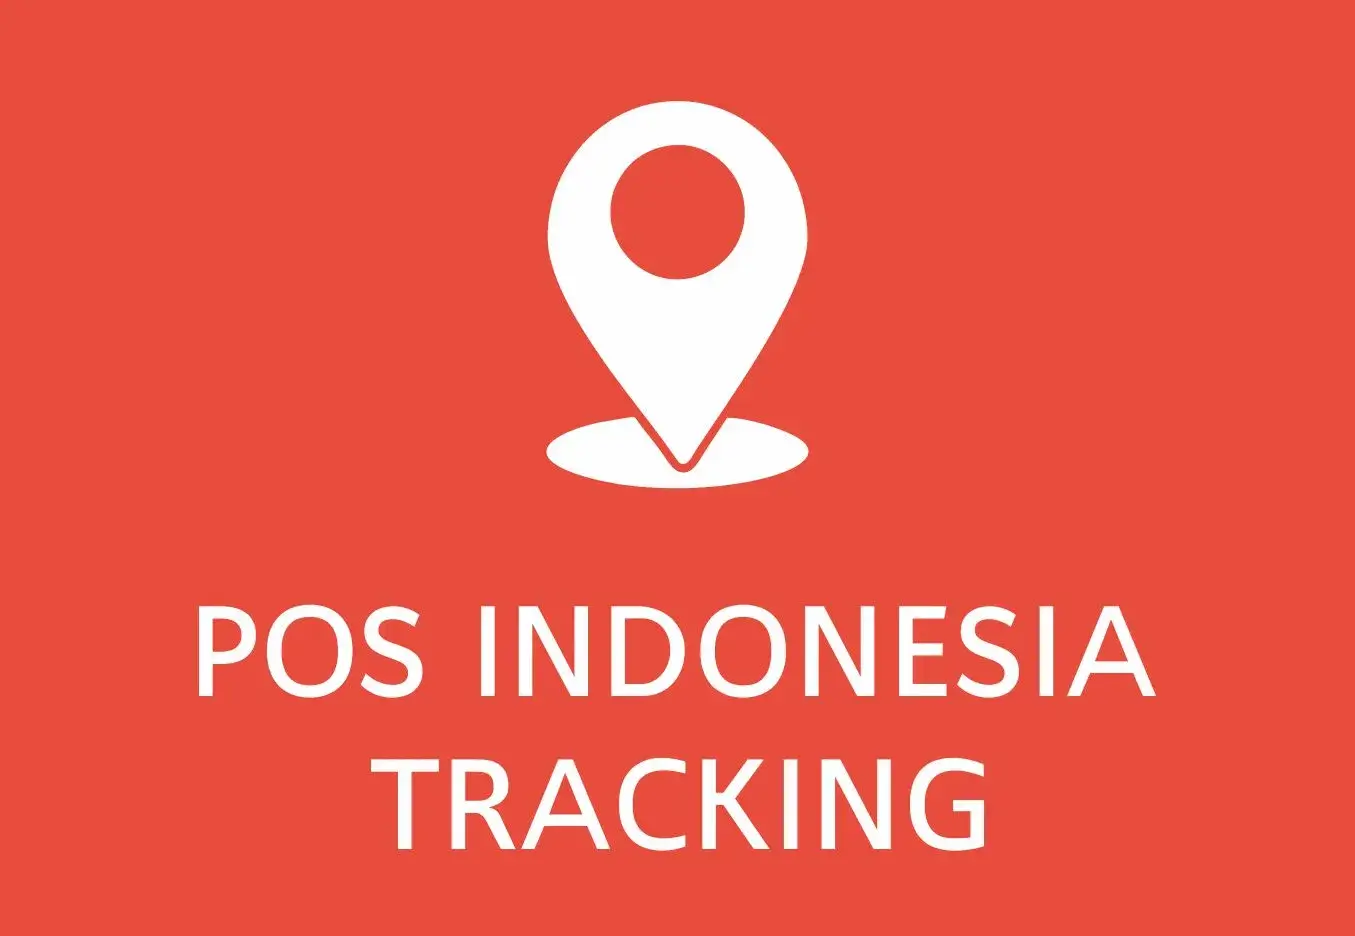 Pos Indonesia Tracking | Indonesia Post